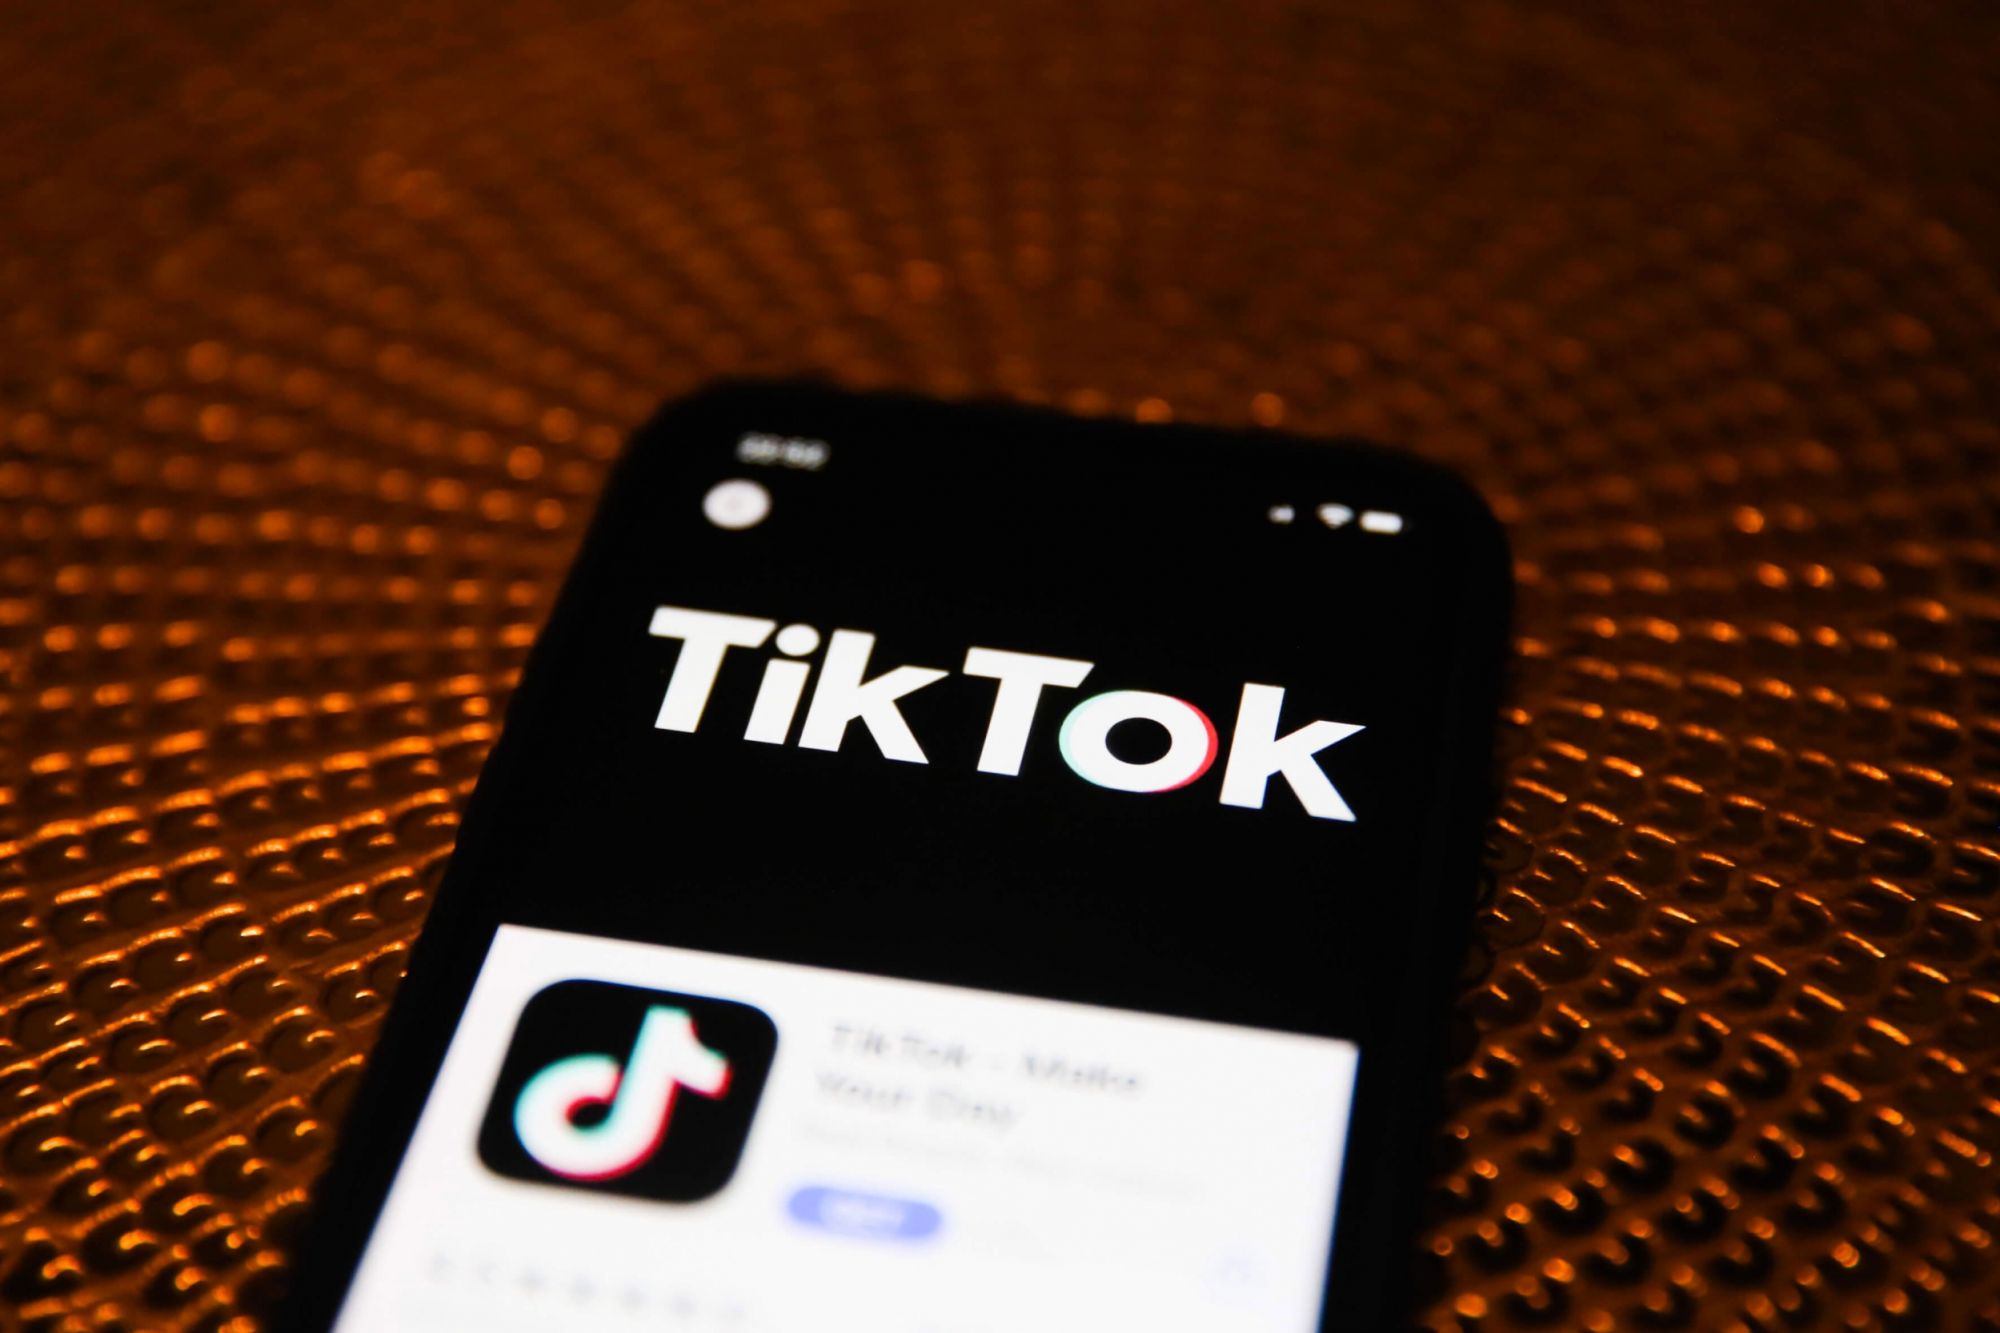 TikTok unveils new feature to assist with job applications